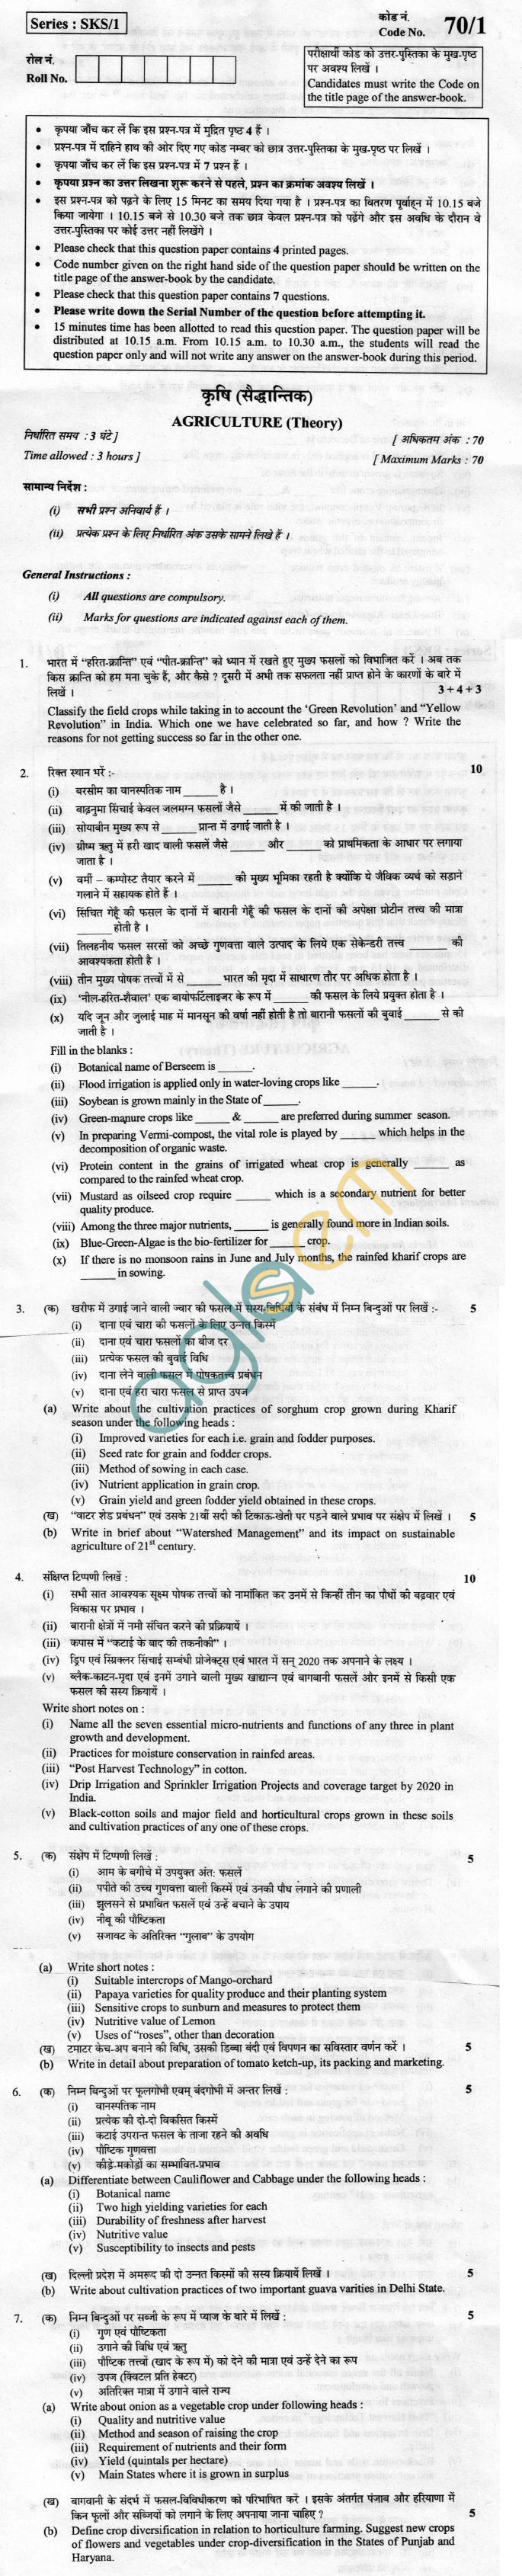 CBSE Board Exam 2013 Class XII Question Paper - Agriculture